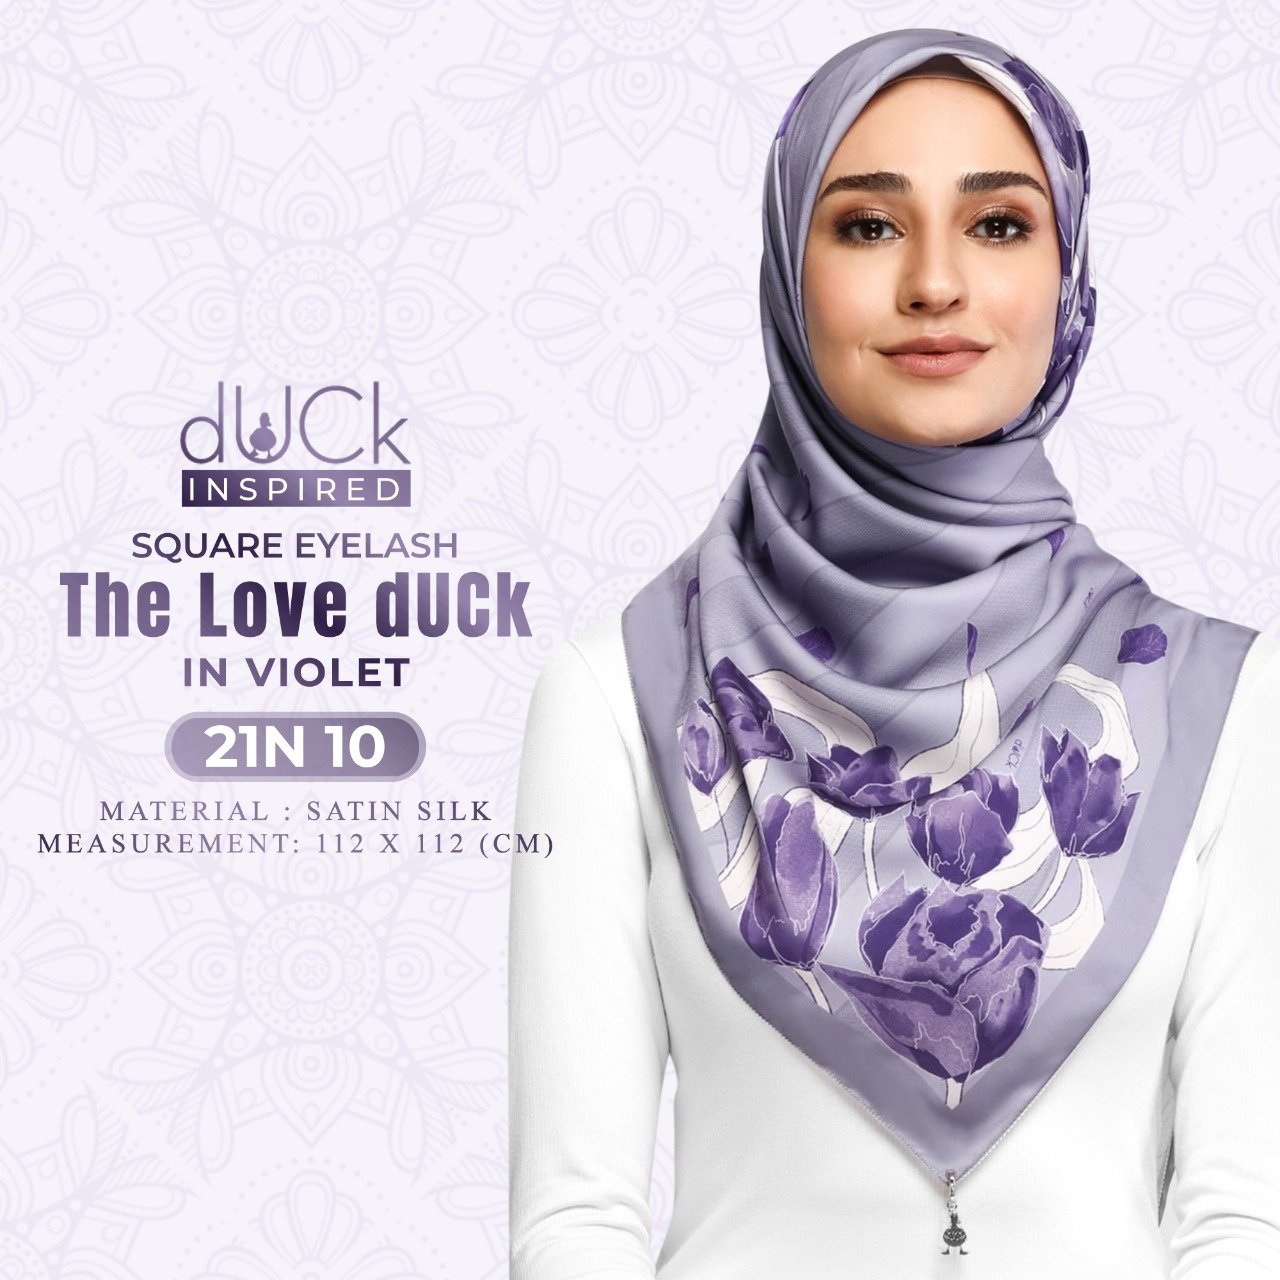 The Love dUCk Square Eyelash Collection